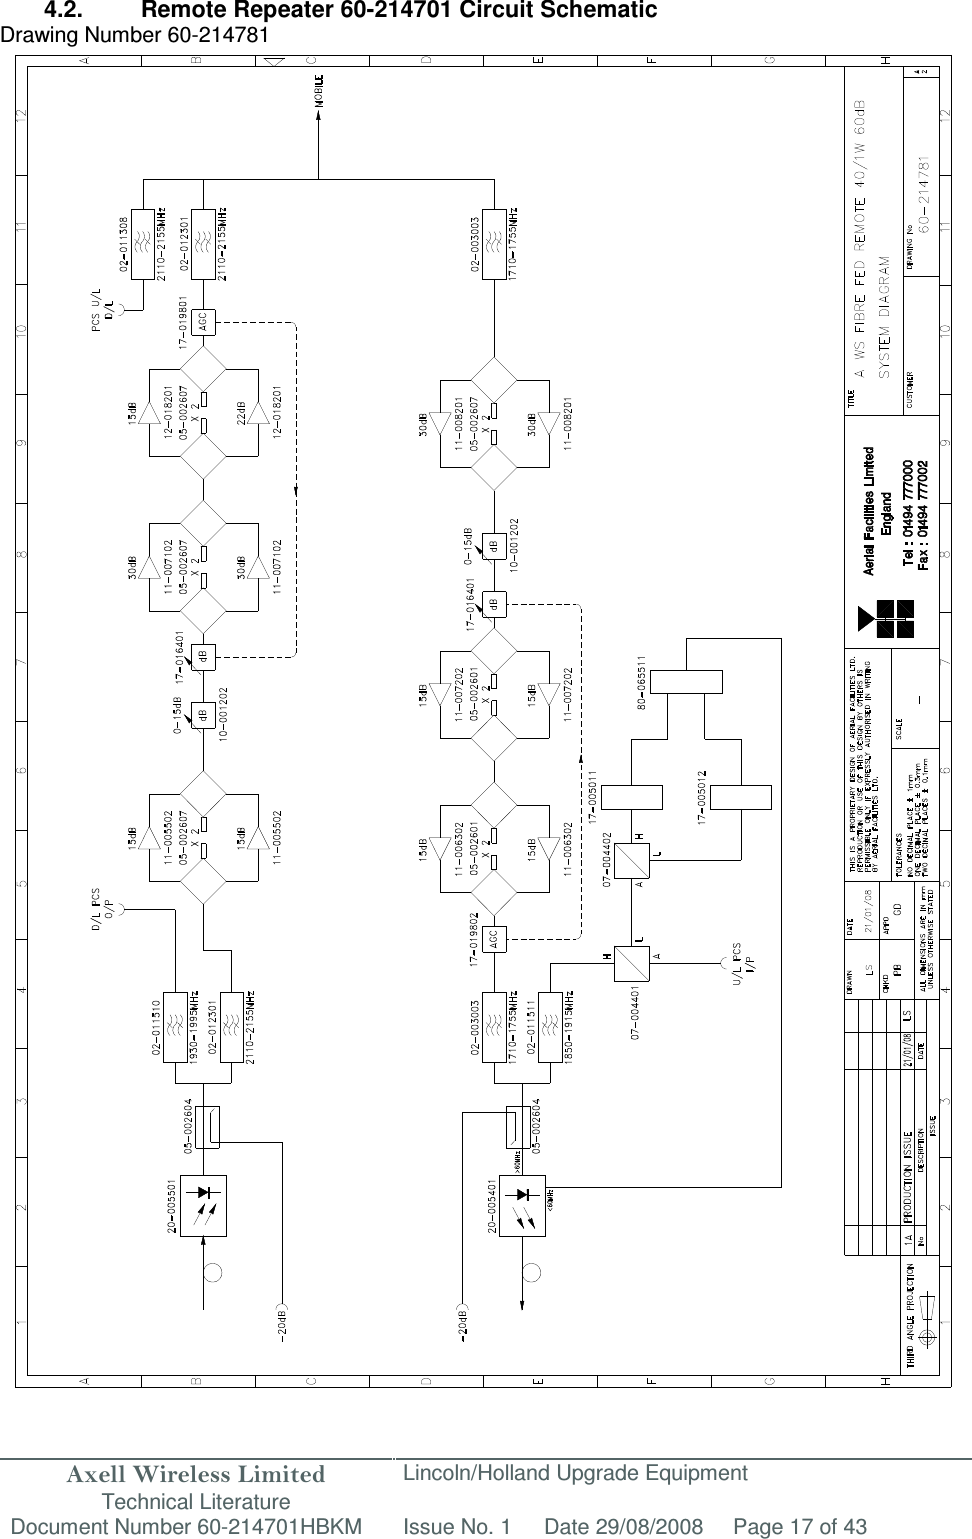 Axell Wireless Limited Technical Literature Lincoln/Holland Upgrade Equipment Document Number 60-214701HBKM Issue No. 1 Date 29/08/2008 Page 17 of 43   4.2.  Remote Repeater 60-214701 Circuit Schematic Drawing Number 60-214781                                                        